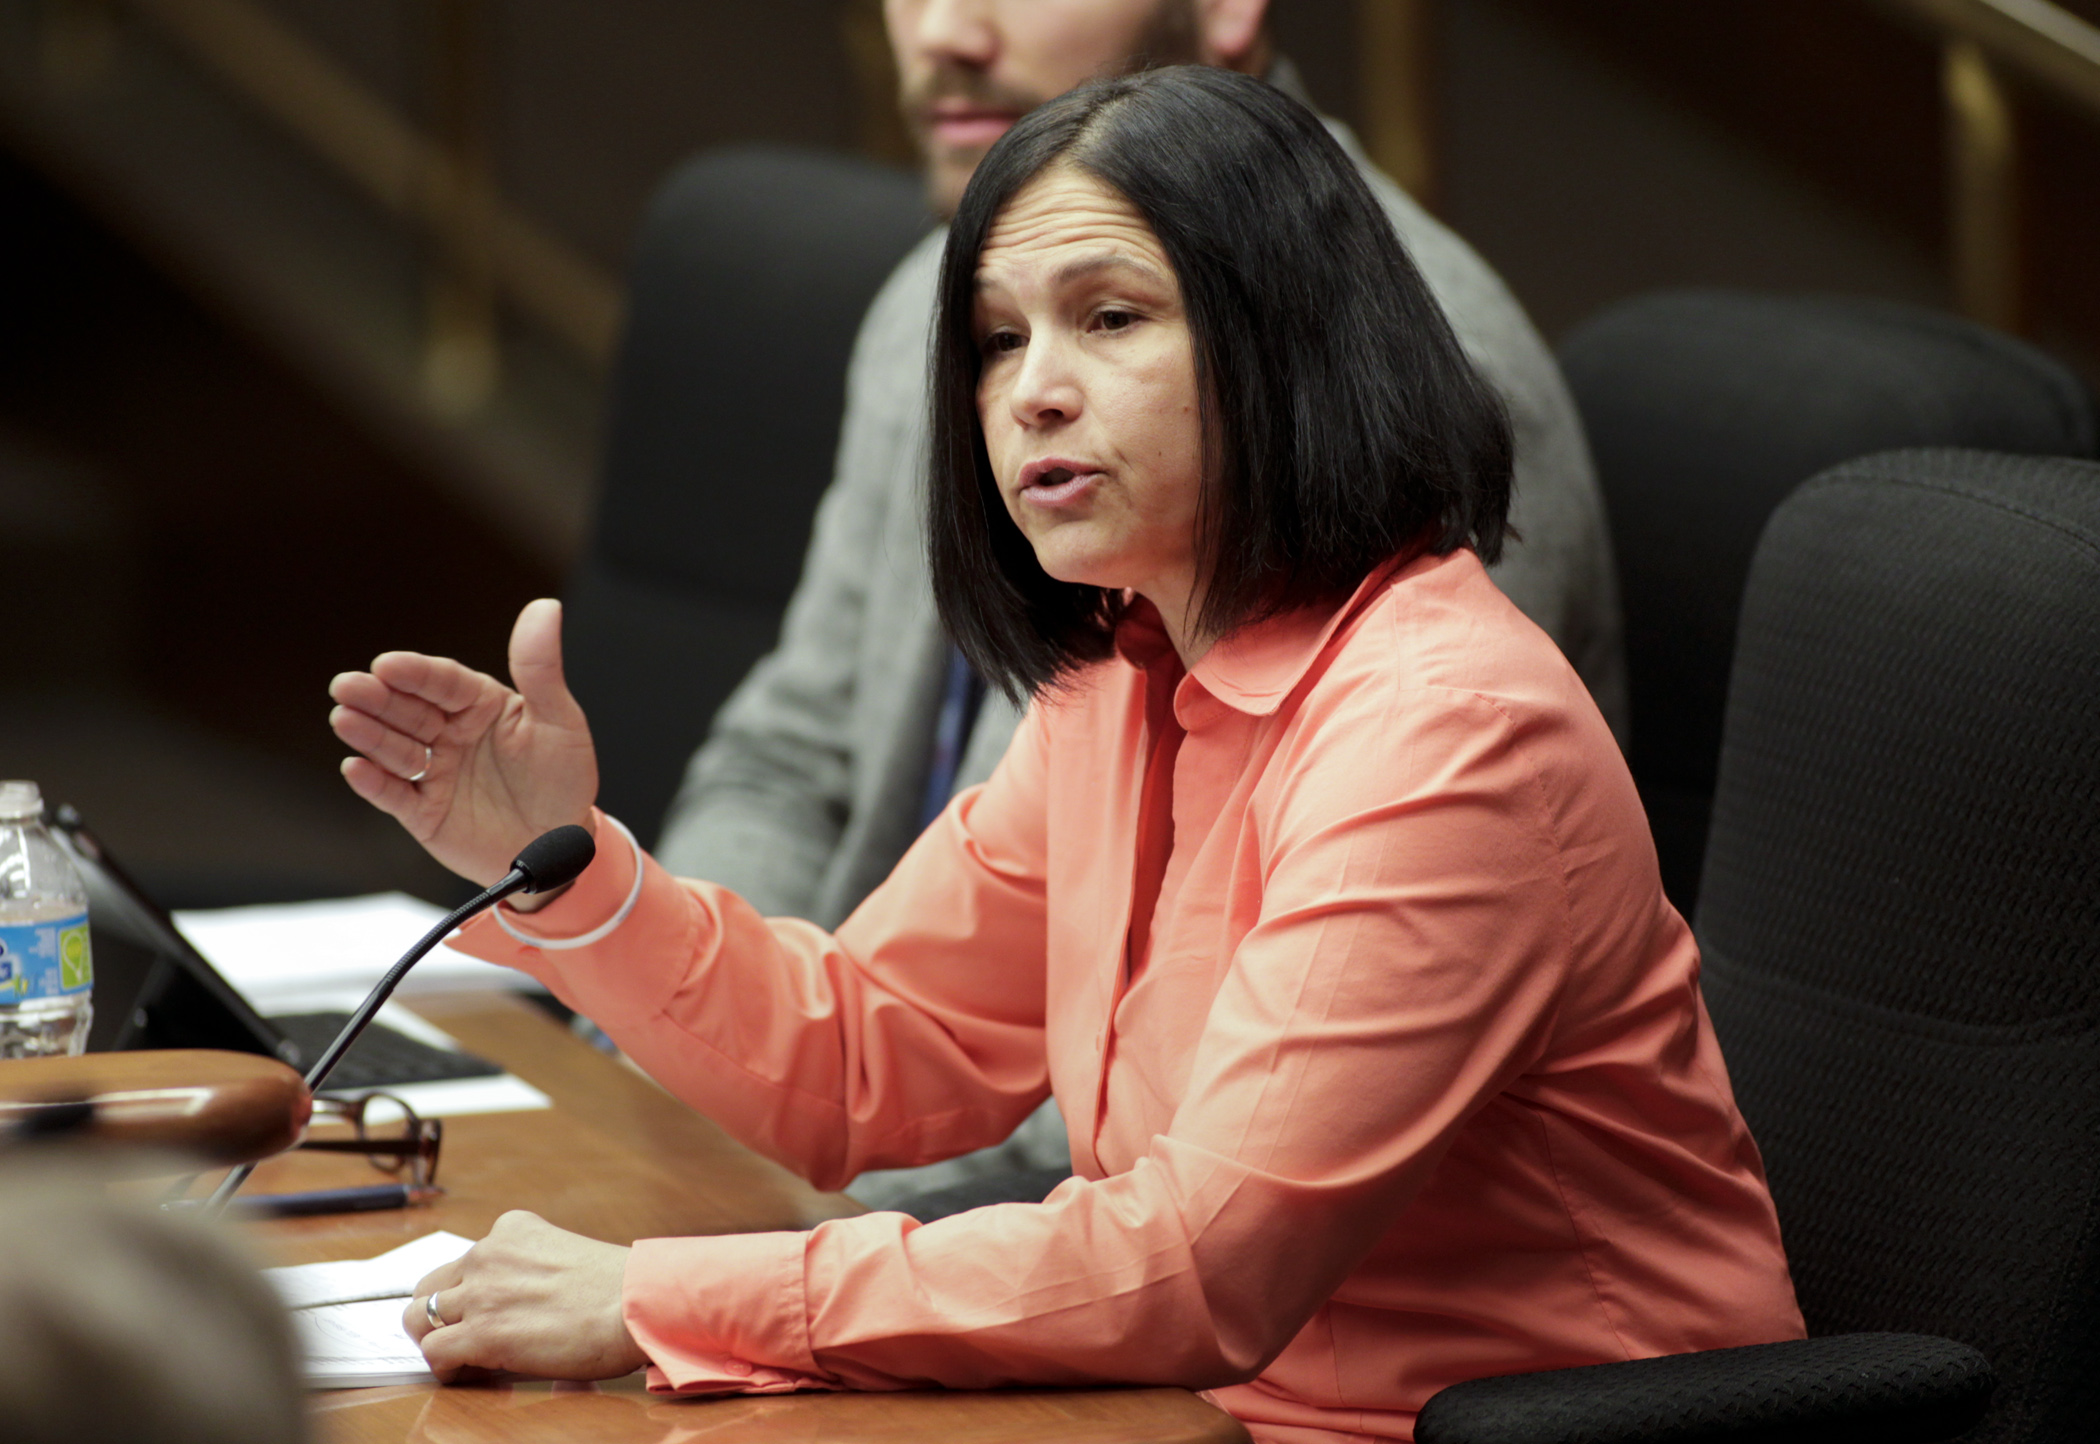 Education Commissioner Brenda Cassellius explains provisions of HF1591, a bill that contains the department’s policy proposals, during March 12 testimony before the House Education Innovation Policy Committee. Photo by Paul Battaglia